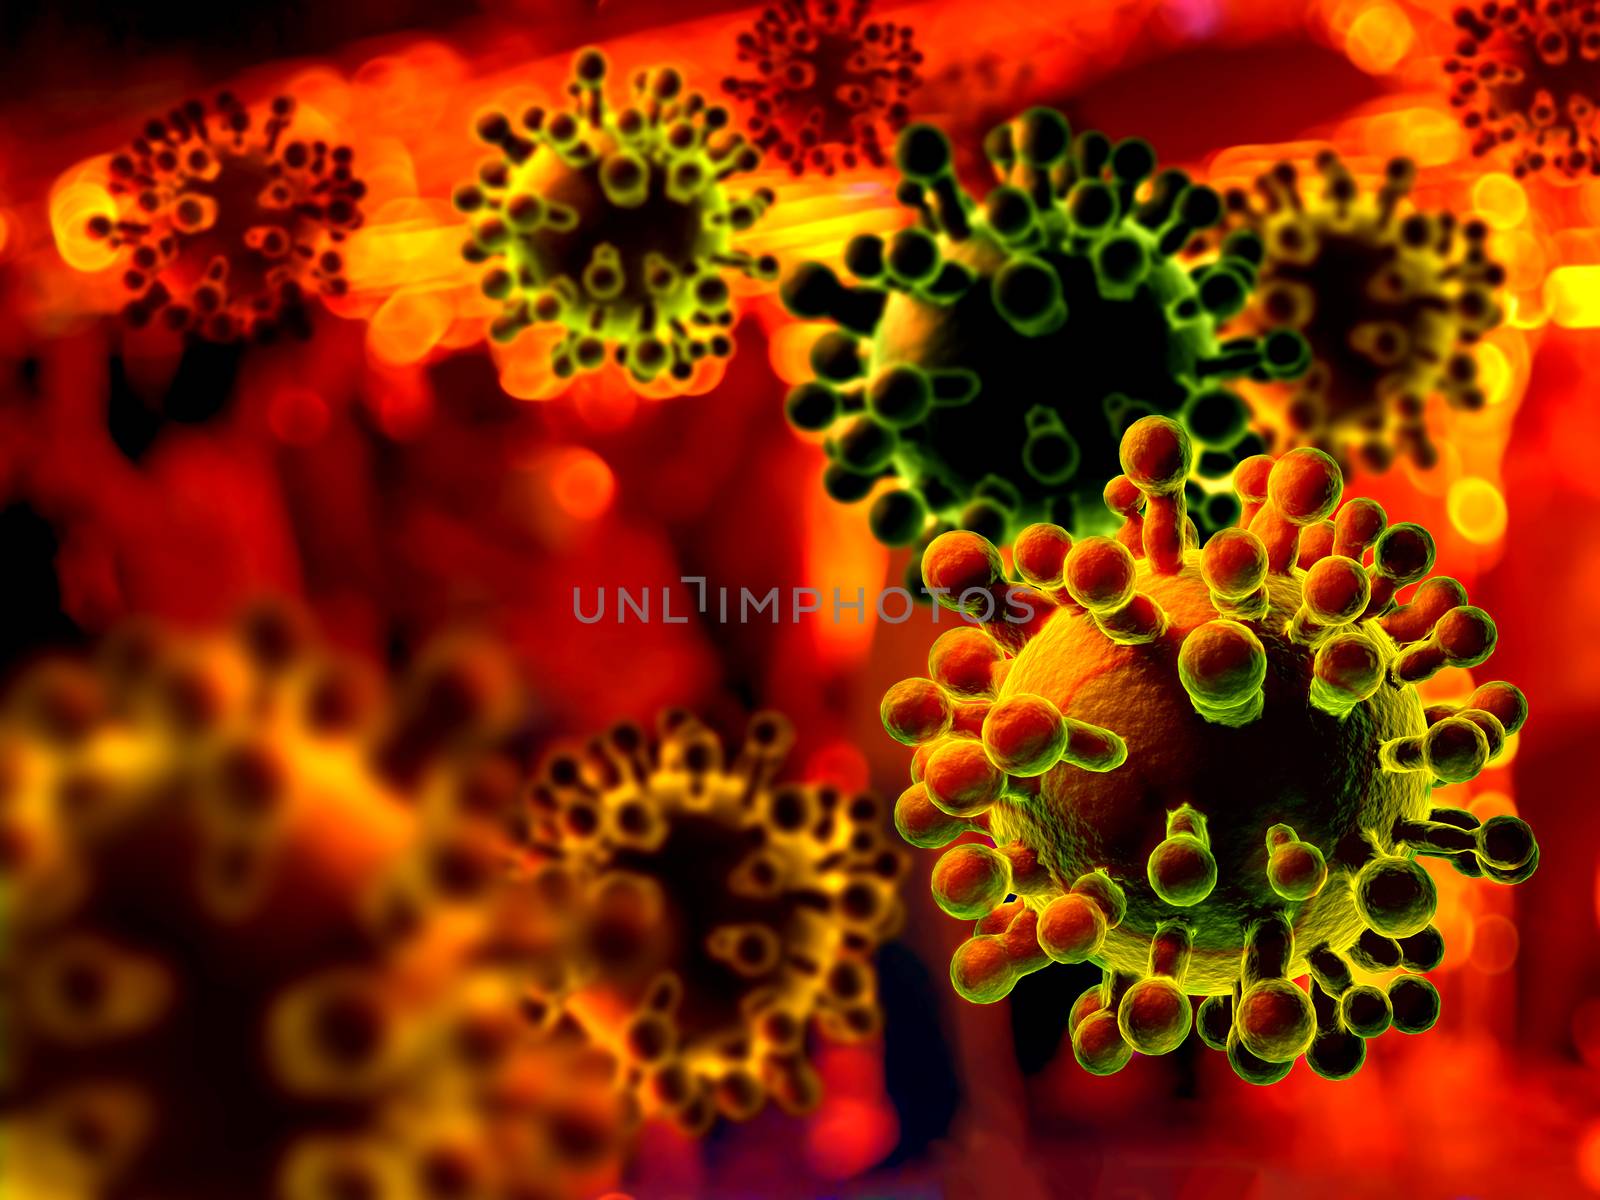 Illustration of corona viruses, covid-19 on red background.  by hadkhanong